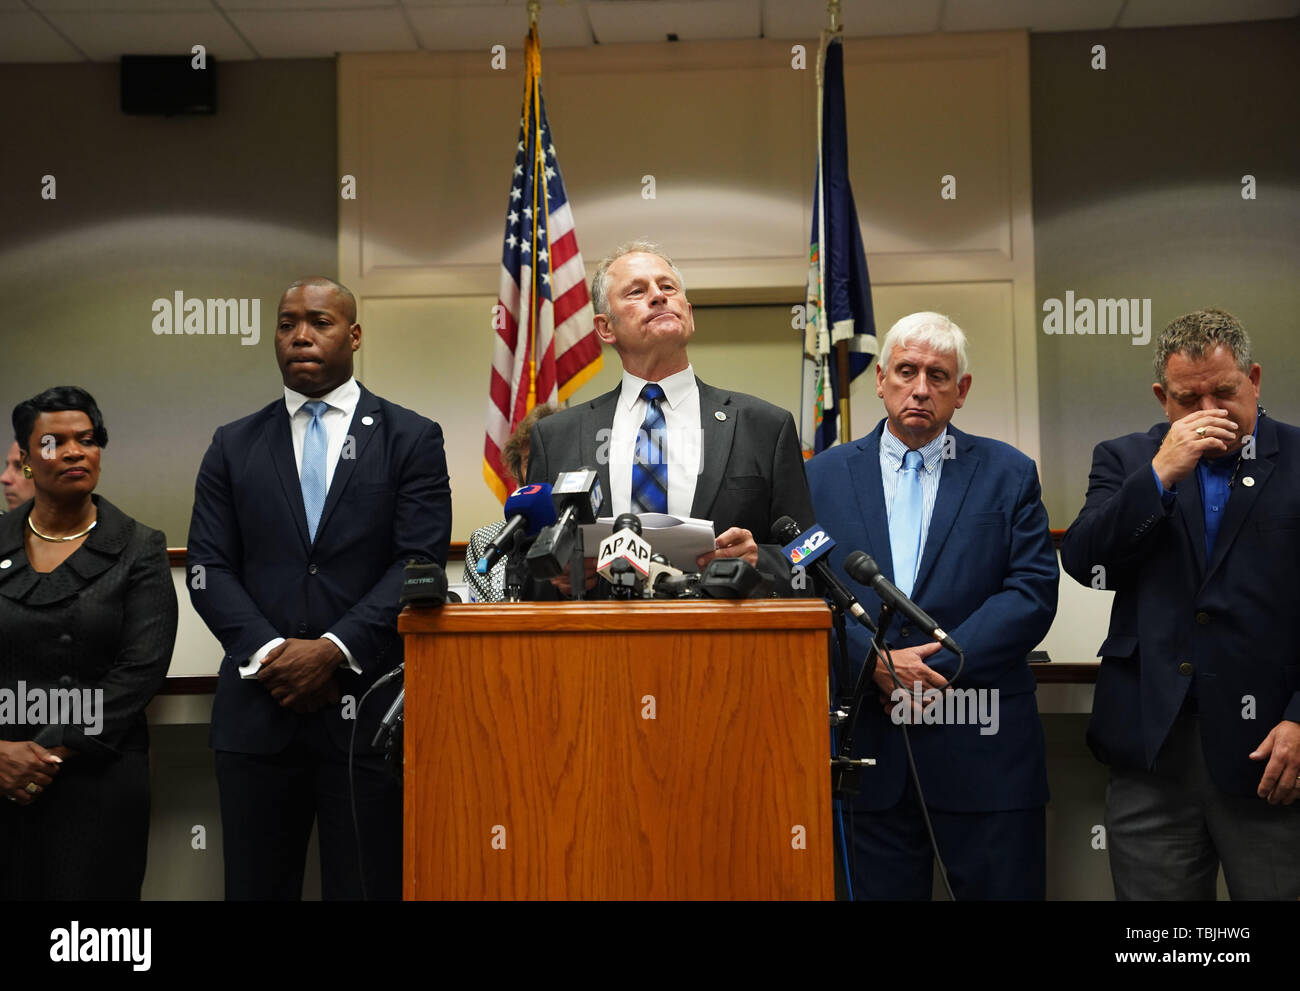 Beijing, USA. 1st June, 2019. Virginia Beach City Manager Dave Hansen (C) speaks during a press conference in Virginia Beach, Virginia, the United States, on June 1, 2019. The shooter who killed 12 people in a mass shooting in Virginia Beach, in the eastern U.S. state of Virginia, on Friday, has been identified as DeWayne Craddock, a 15-year city employee, local police said on Saturday. Credit: Liu Jie/Xinhua/Alamy Live News Stock Photo